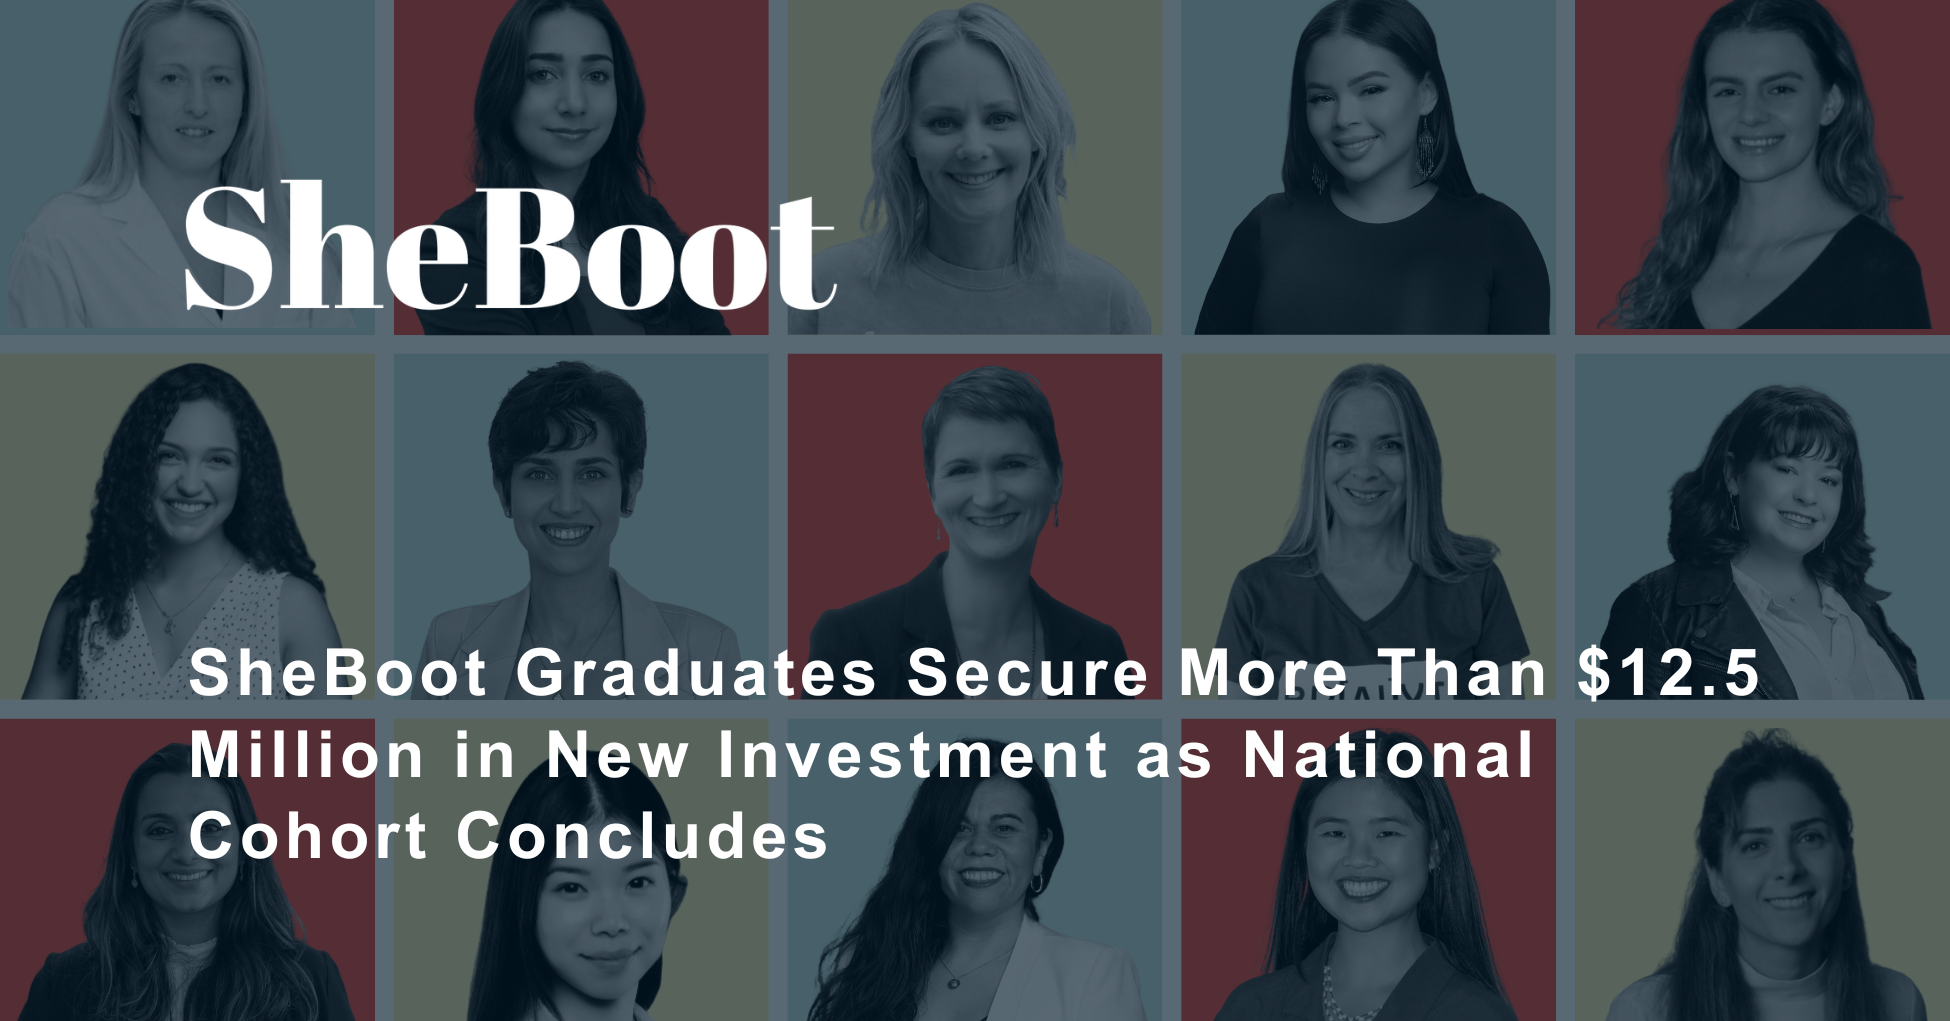 SheBoot Graduates Secure More Than $12.5 Million in New Investment as National Cohort Concludes